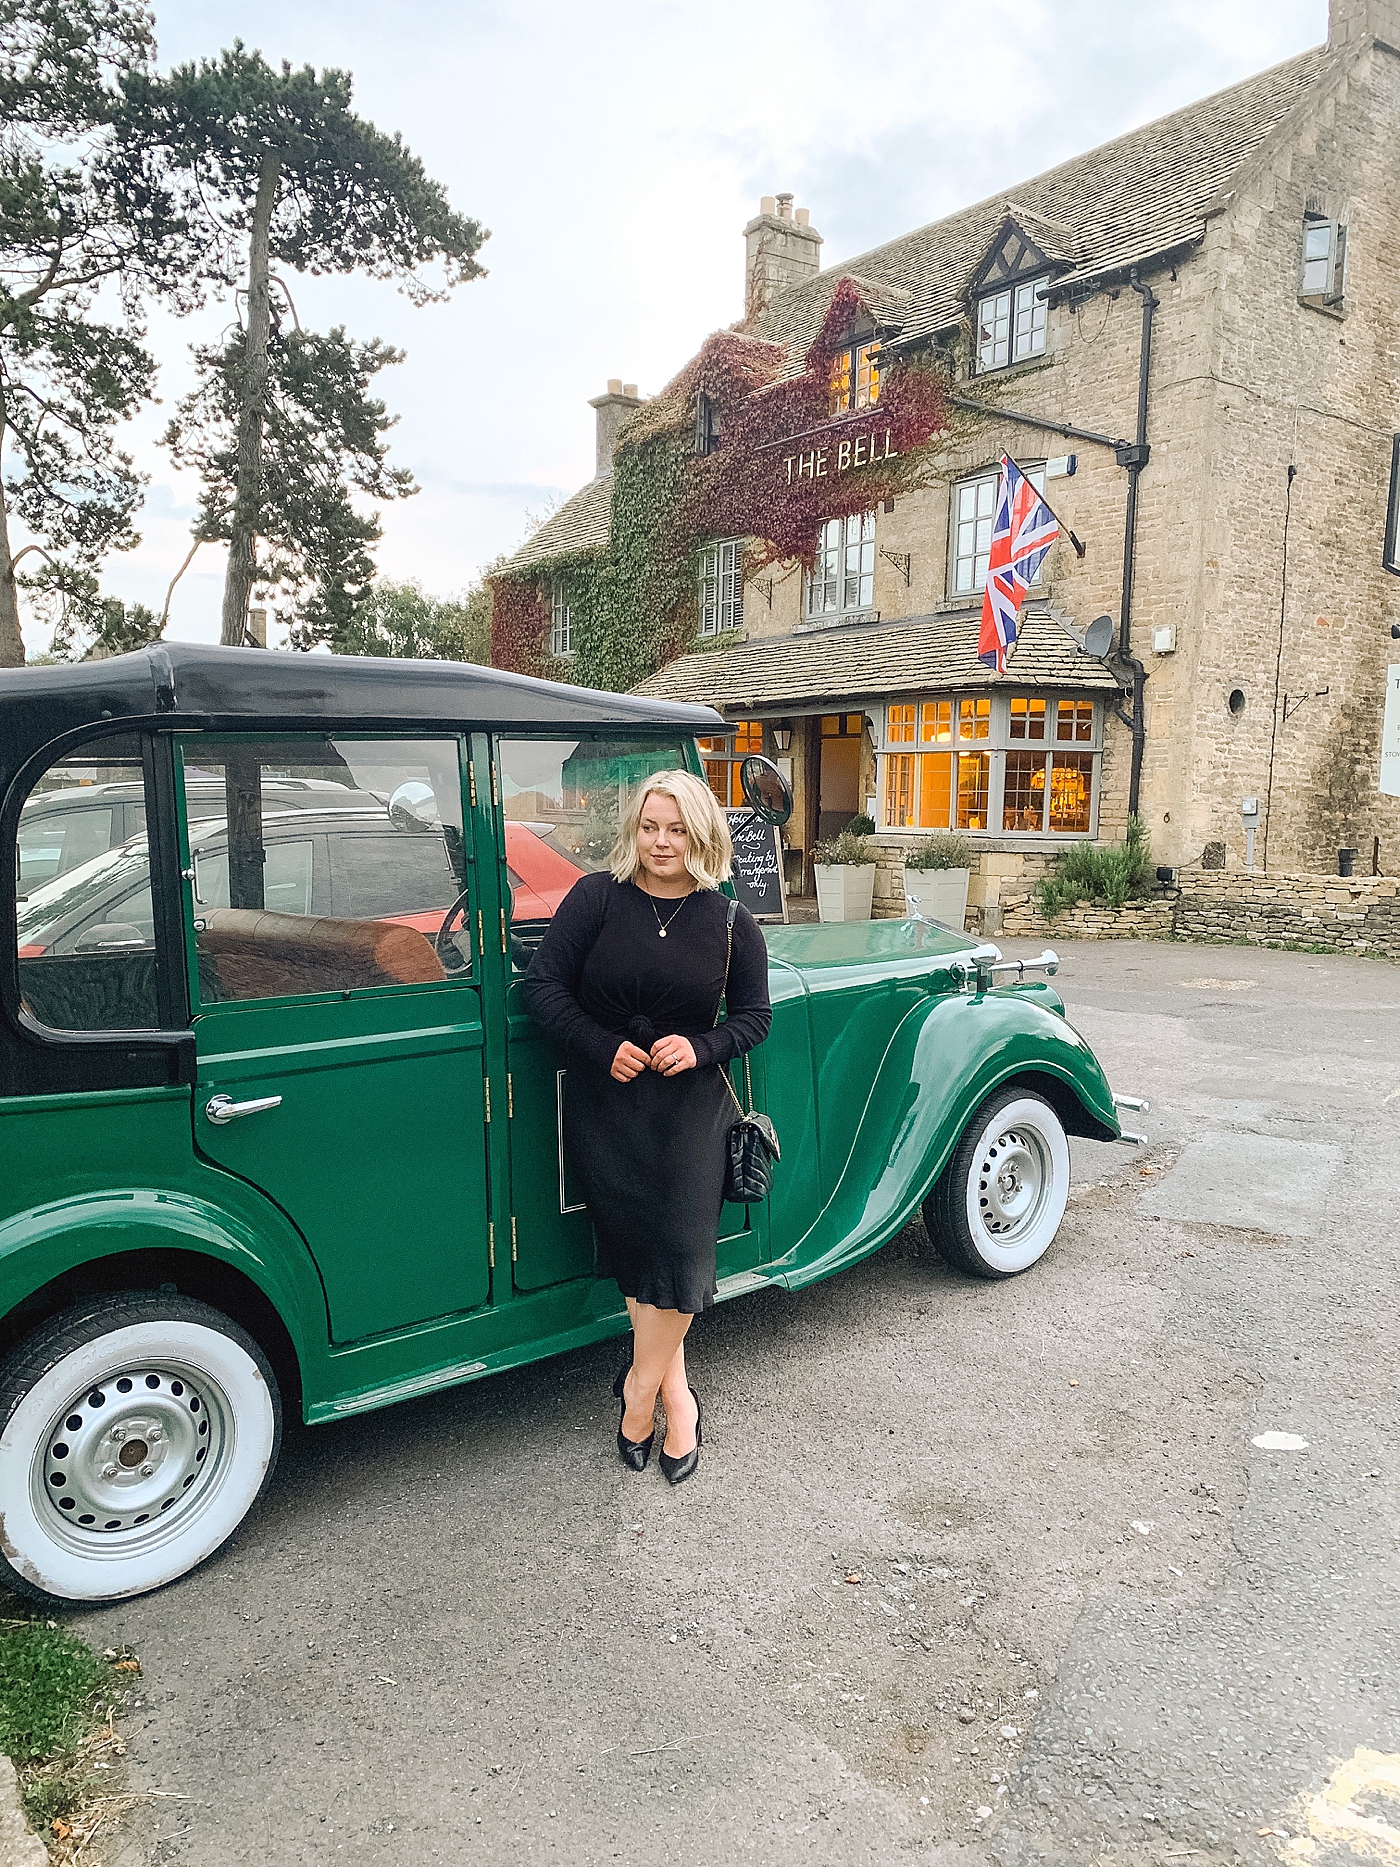 Woman in black with blonde hair near a green car | Photo by Cotswolds Wedding Photographer Hope Helmuth 